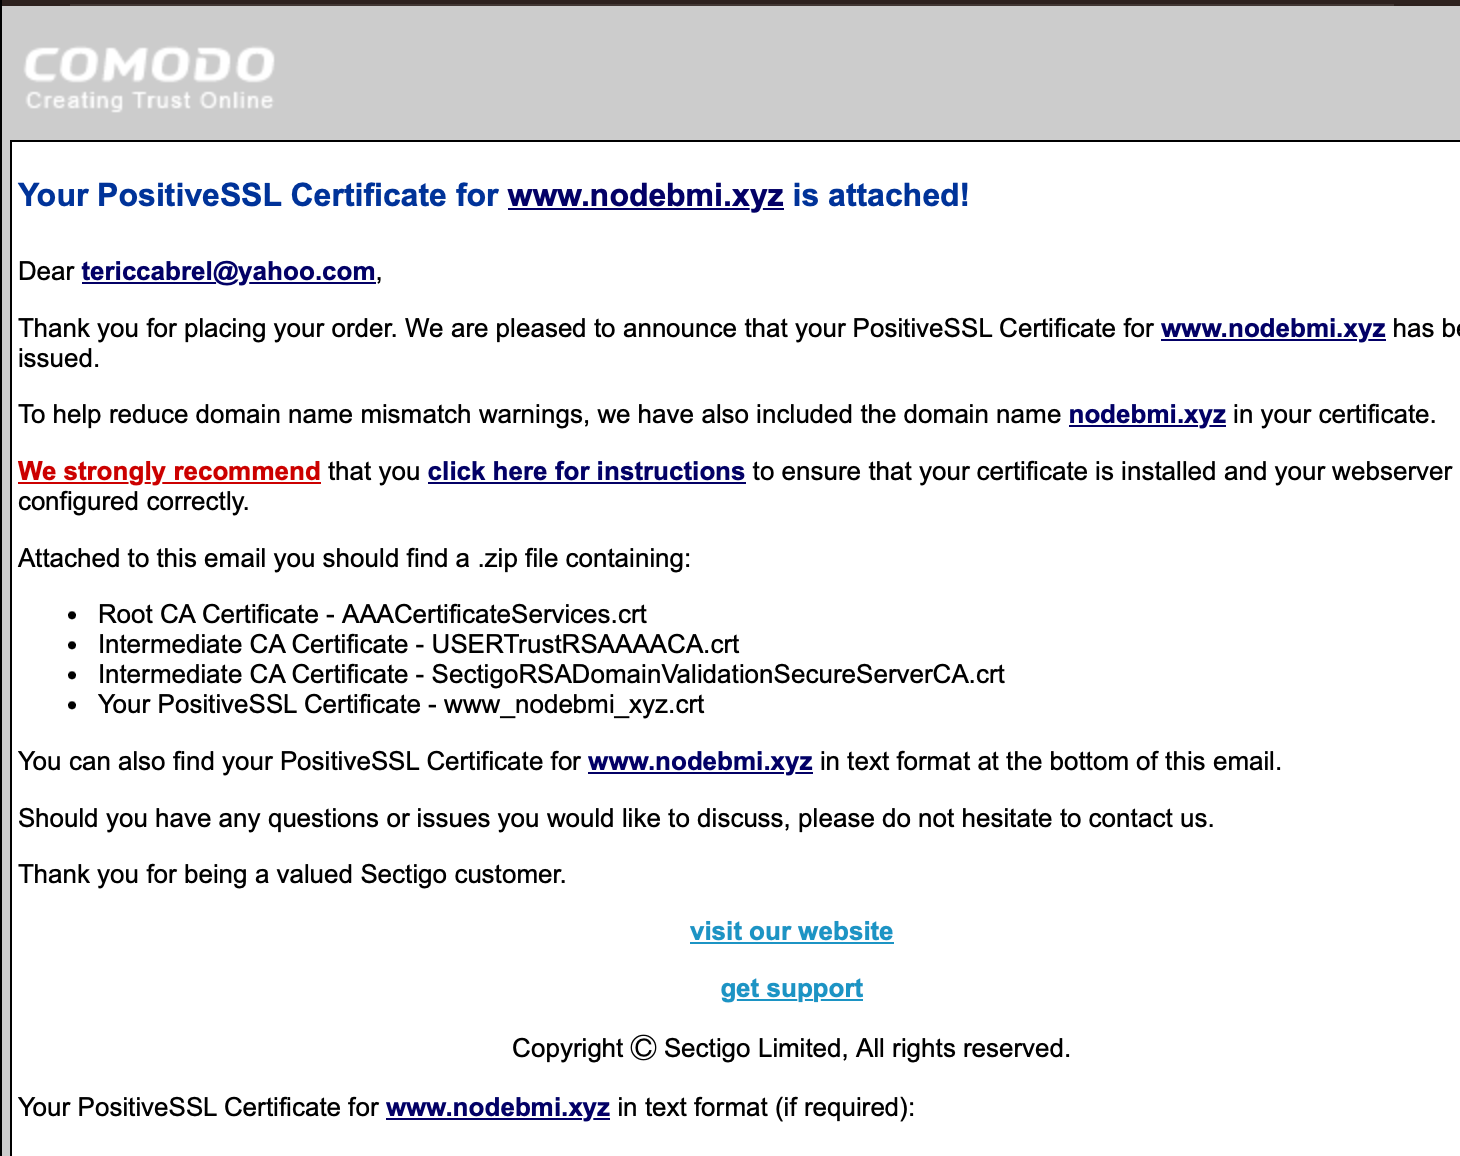 The email containing the SSL certificate for the website.